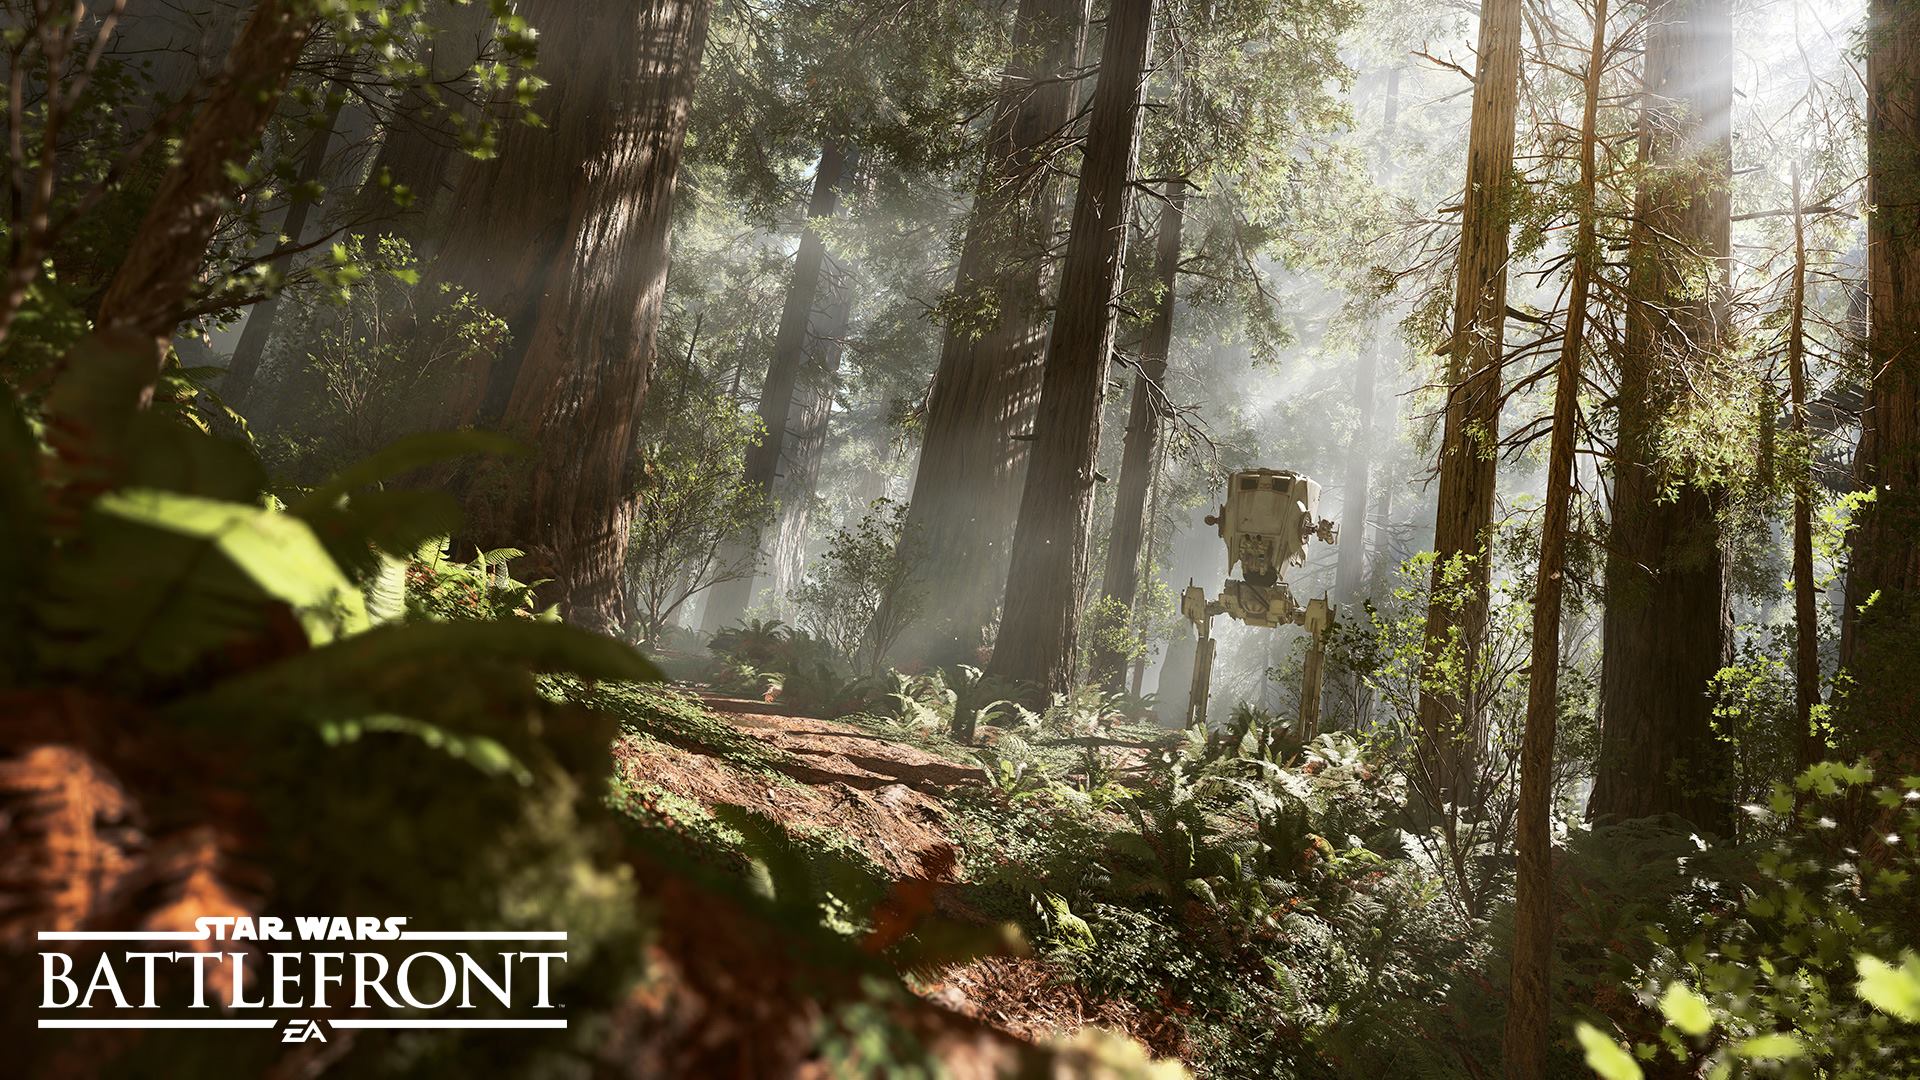 Star Wars Battlefront Gets Awesome New Screenshot Info On Character